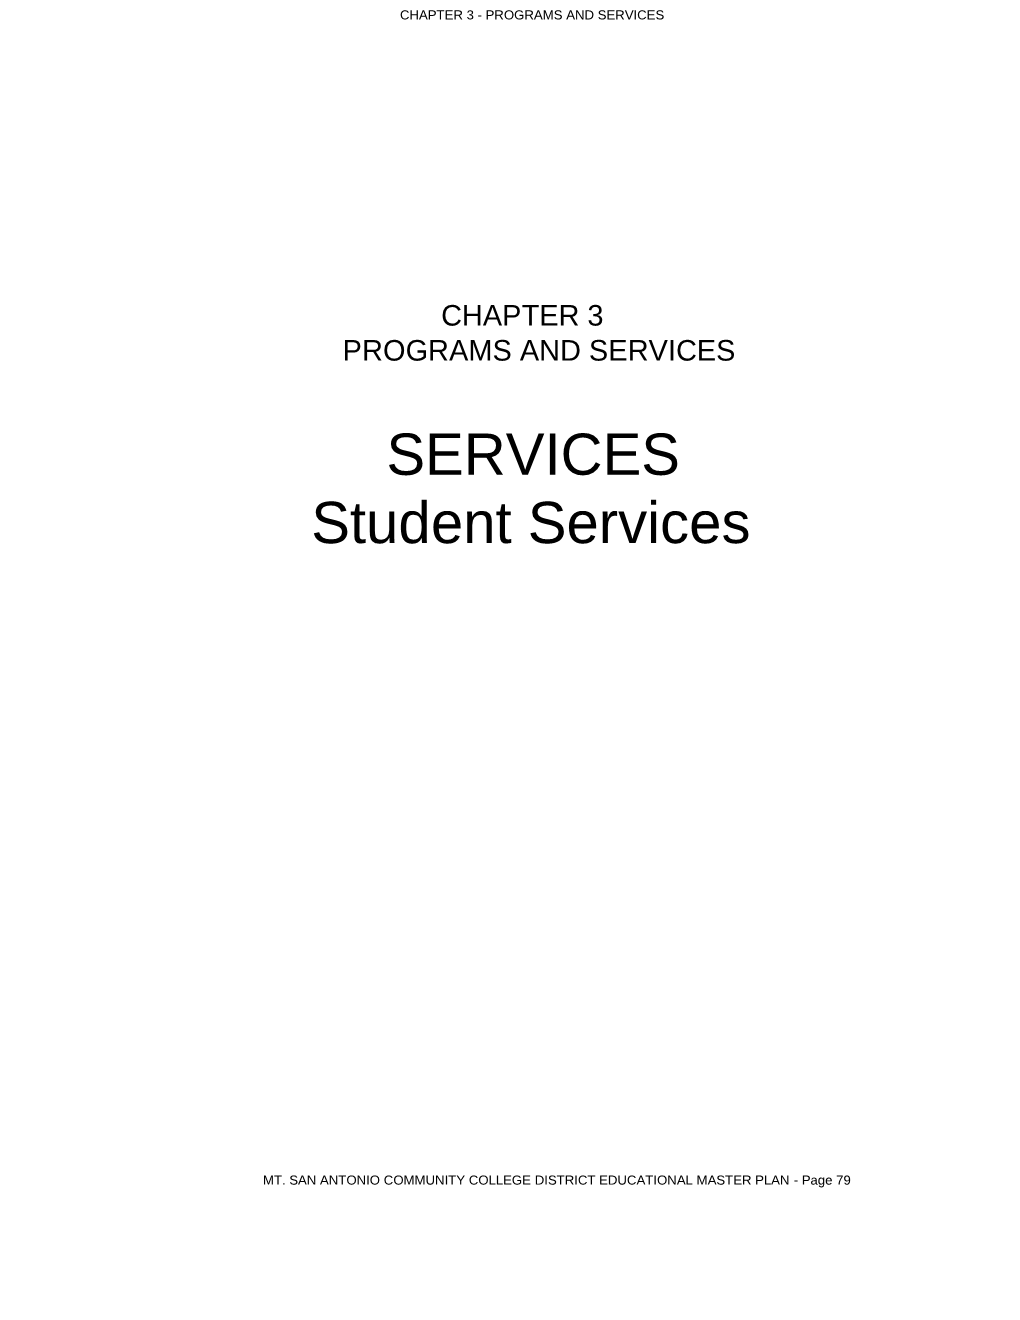 Chapter 3 - Programs and Services